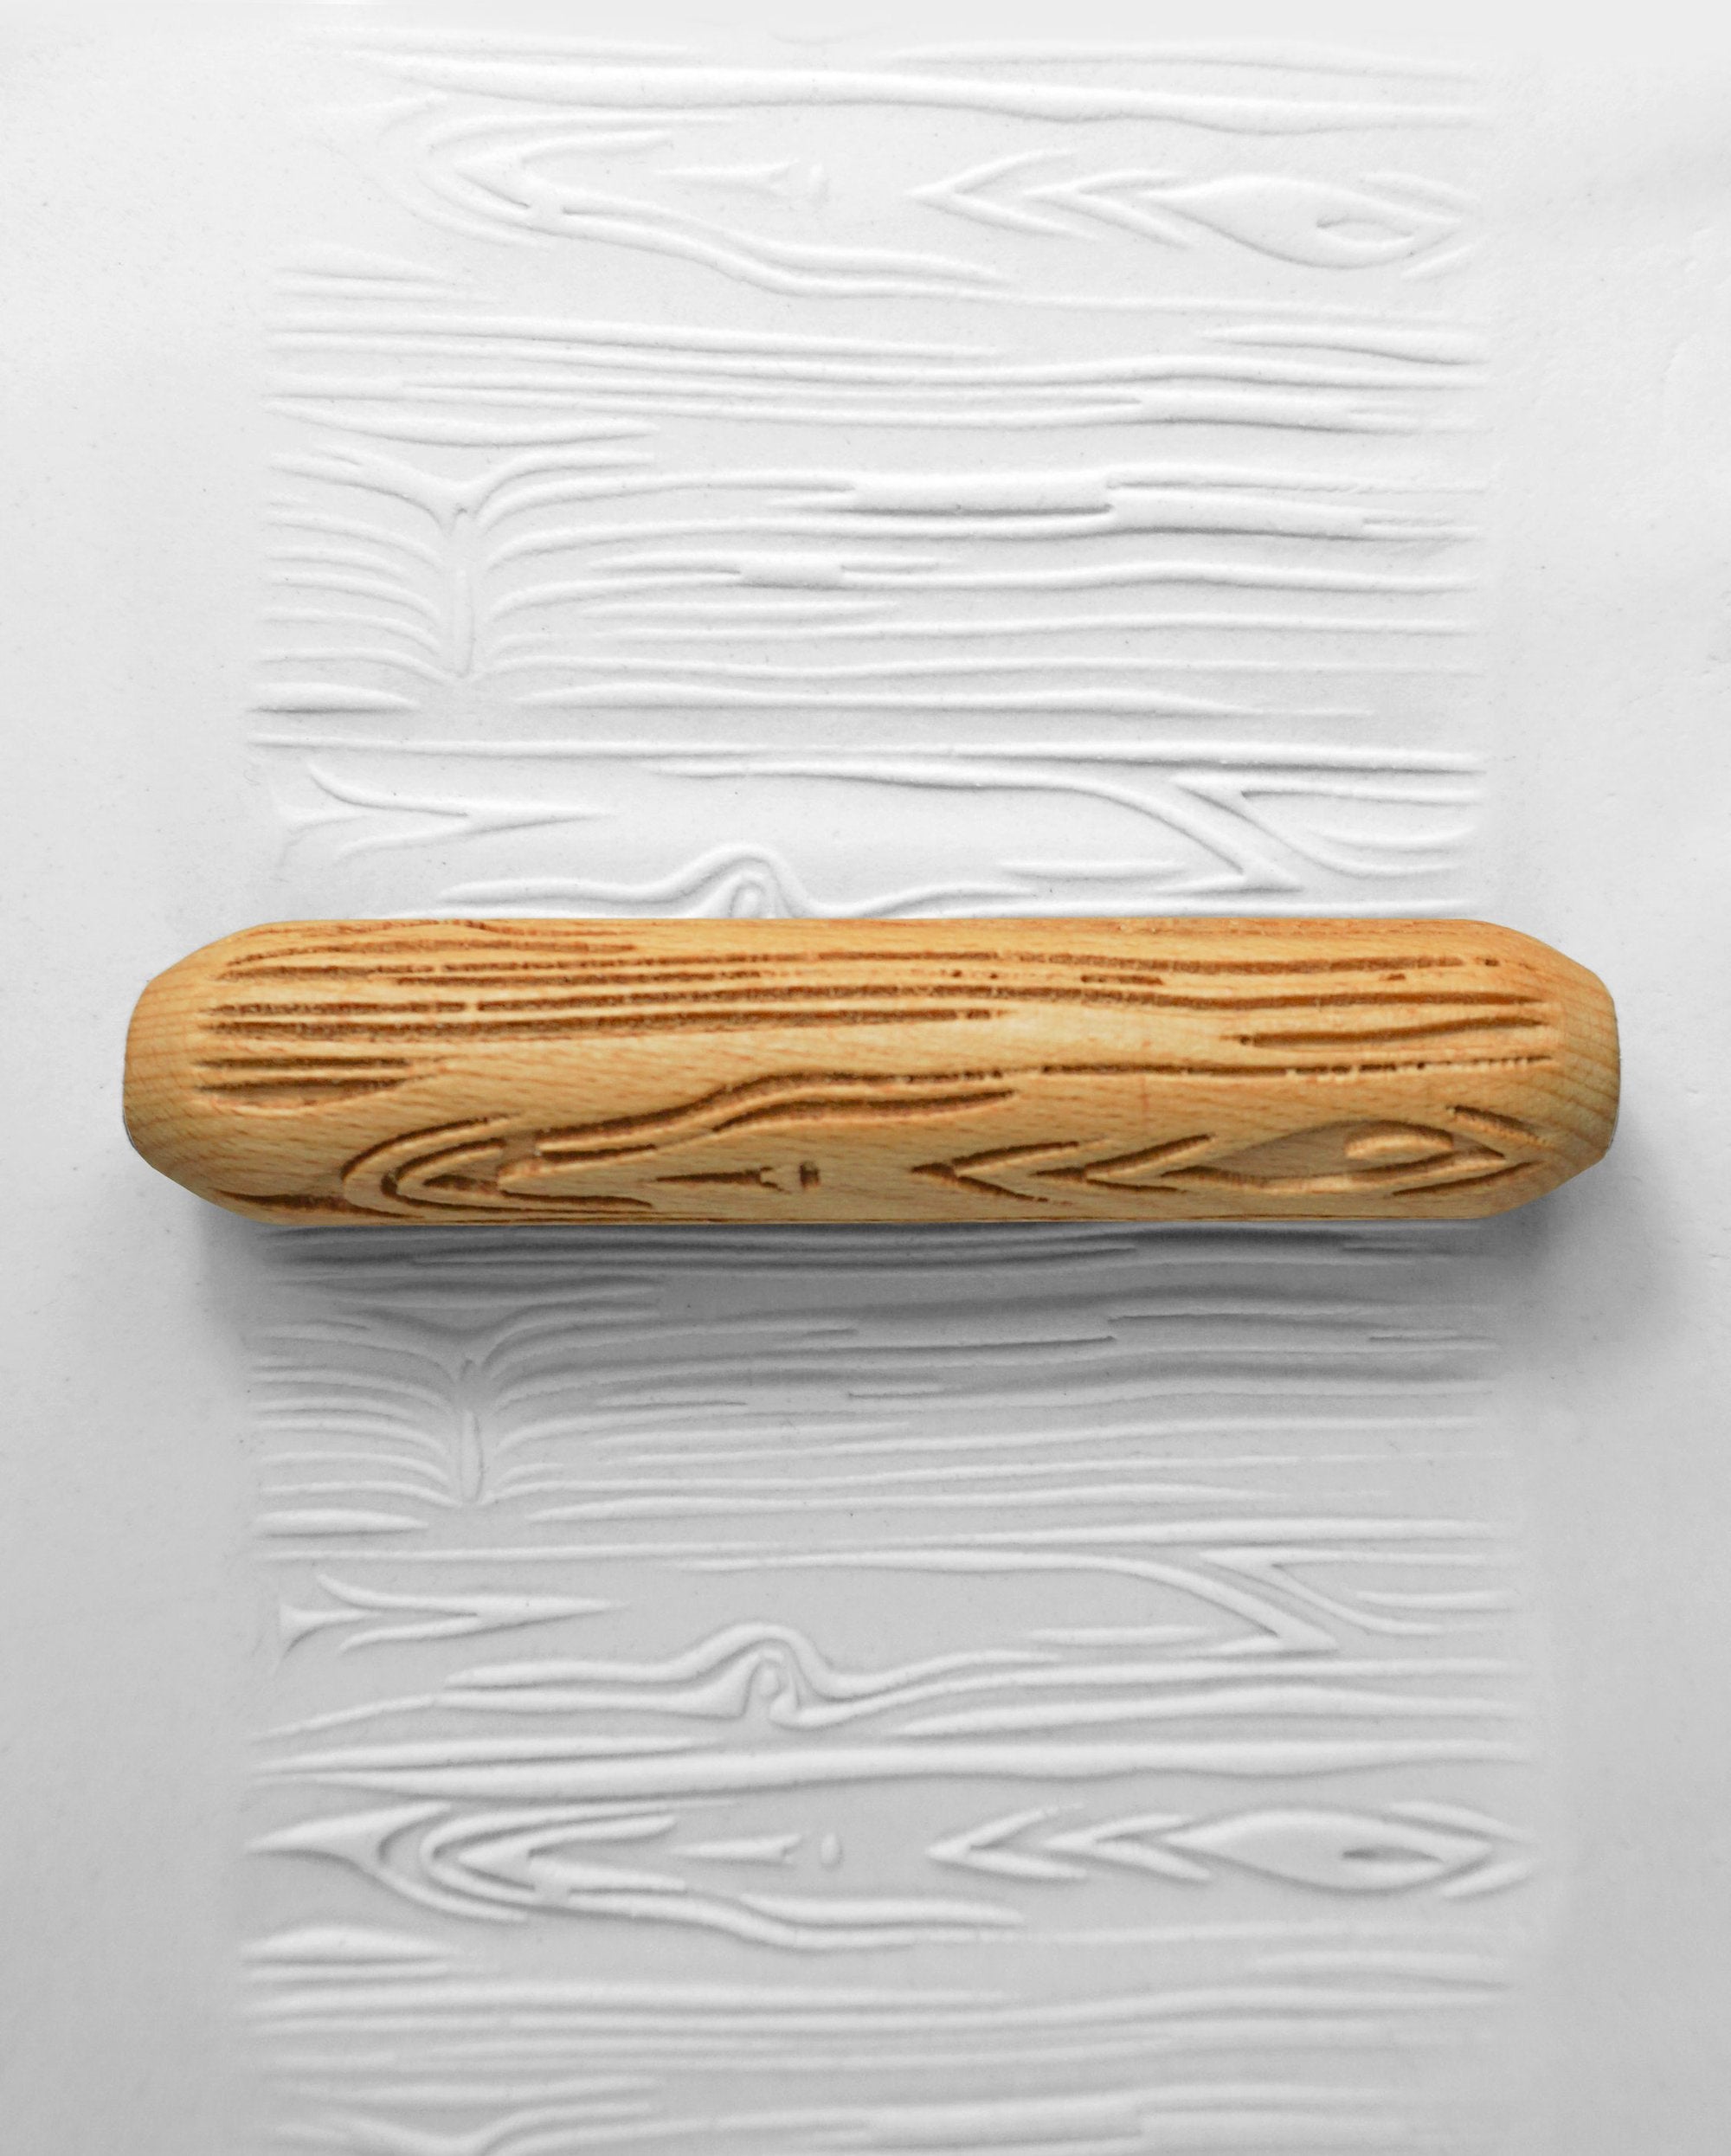 4 Hand Rollers for marking clay like rolling pin